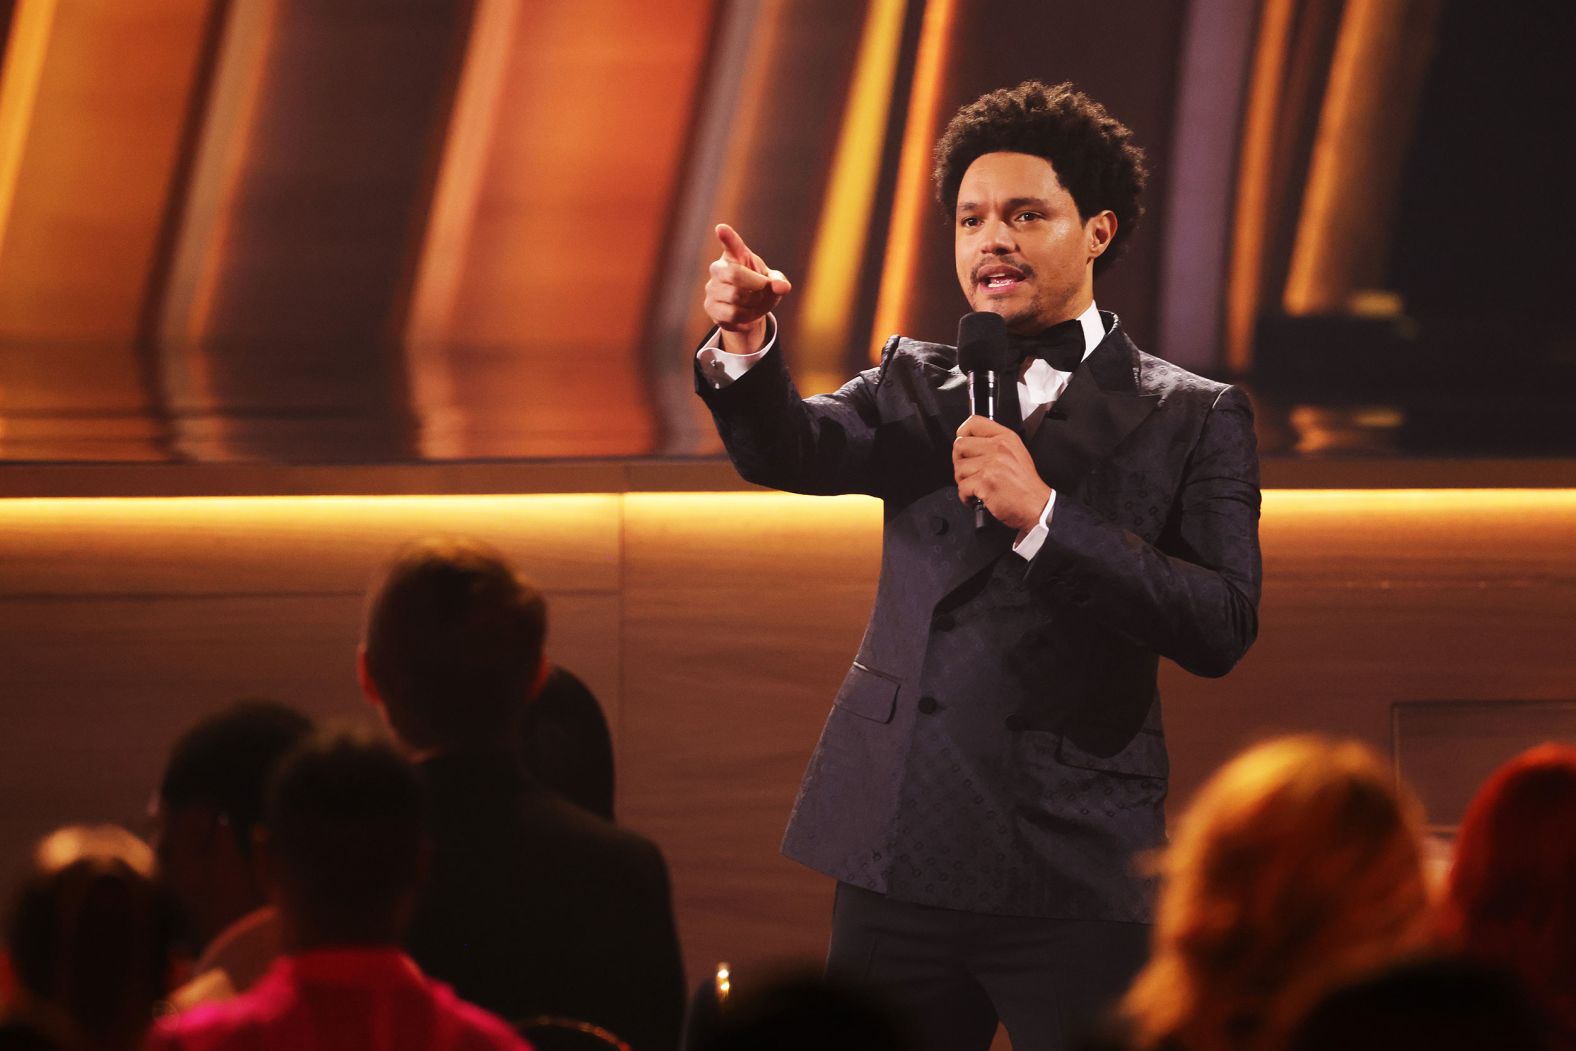 Host Trevor Noah delivers the show's opening monologue. Noah, who also hosted the show last year, referenced <a href="index.php?page=&url=http%3A%2F%2Fwww.cnn.com%2F2022%2F03%2F27%2Fentertainment%2Fgallery%2F2022-academy-awards-photos%2Findex.html" target="_blank">last week's Oscars moment</a> when Will Smith slapped Chris Rock. "We're going to be dancing. We're going to be singing. We're going to be keeping people's names out of our mouths," Noah joked.